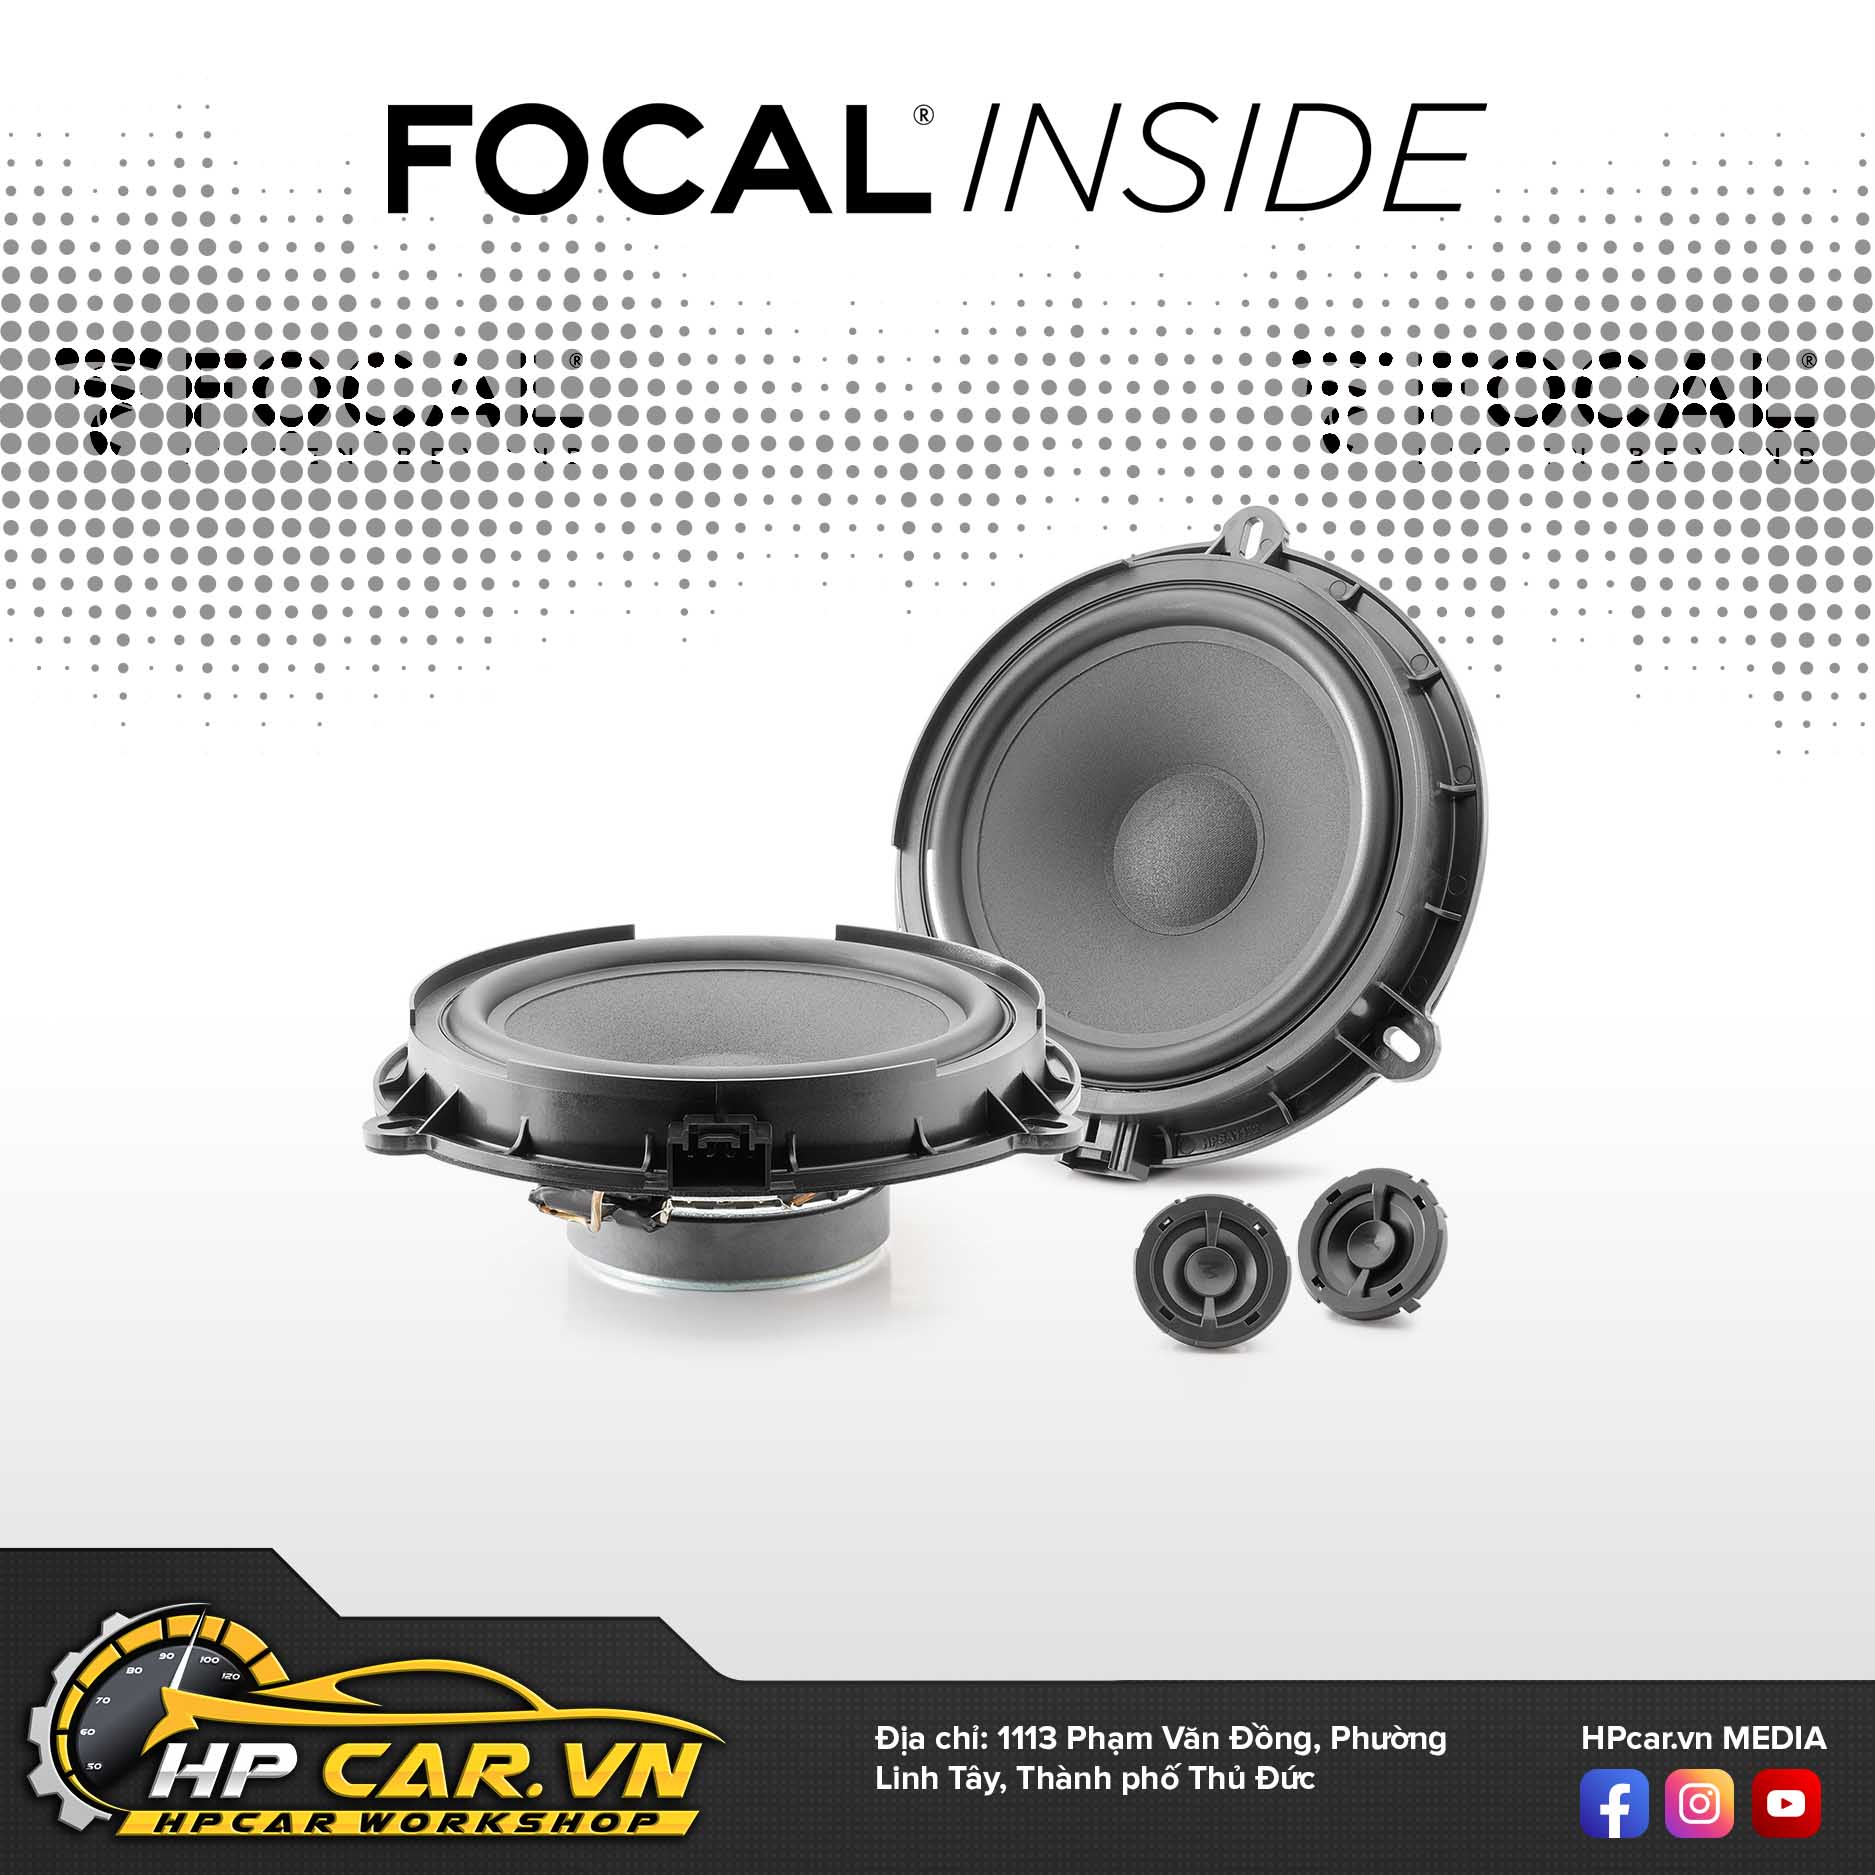 lắp đặt Focal ic Ford 165